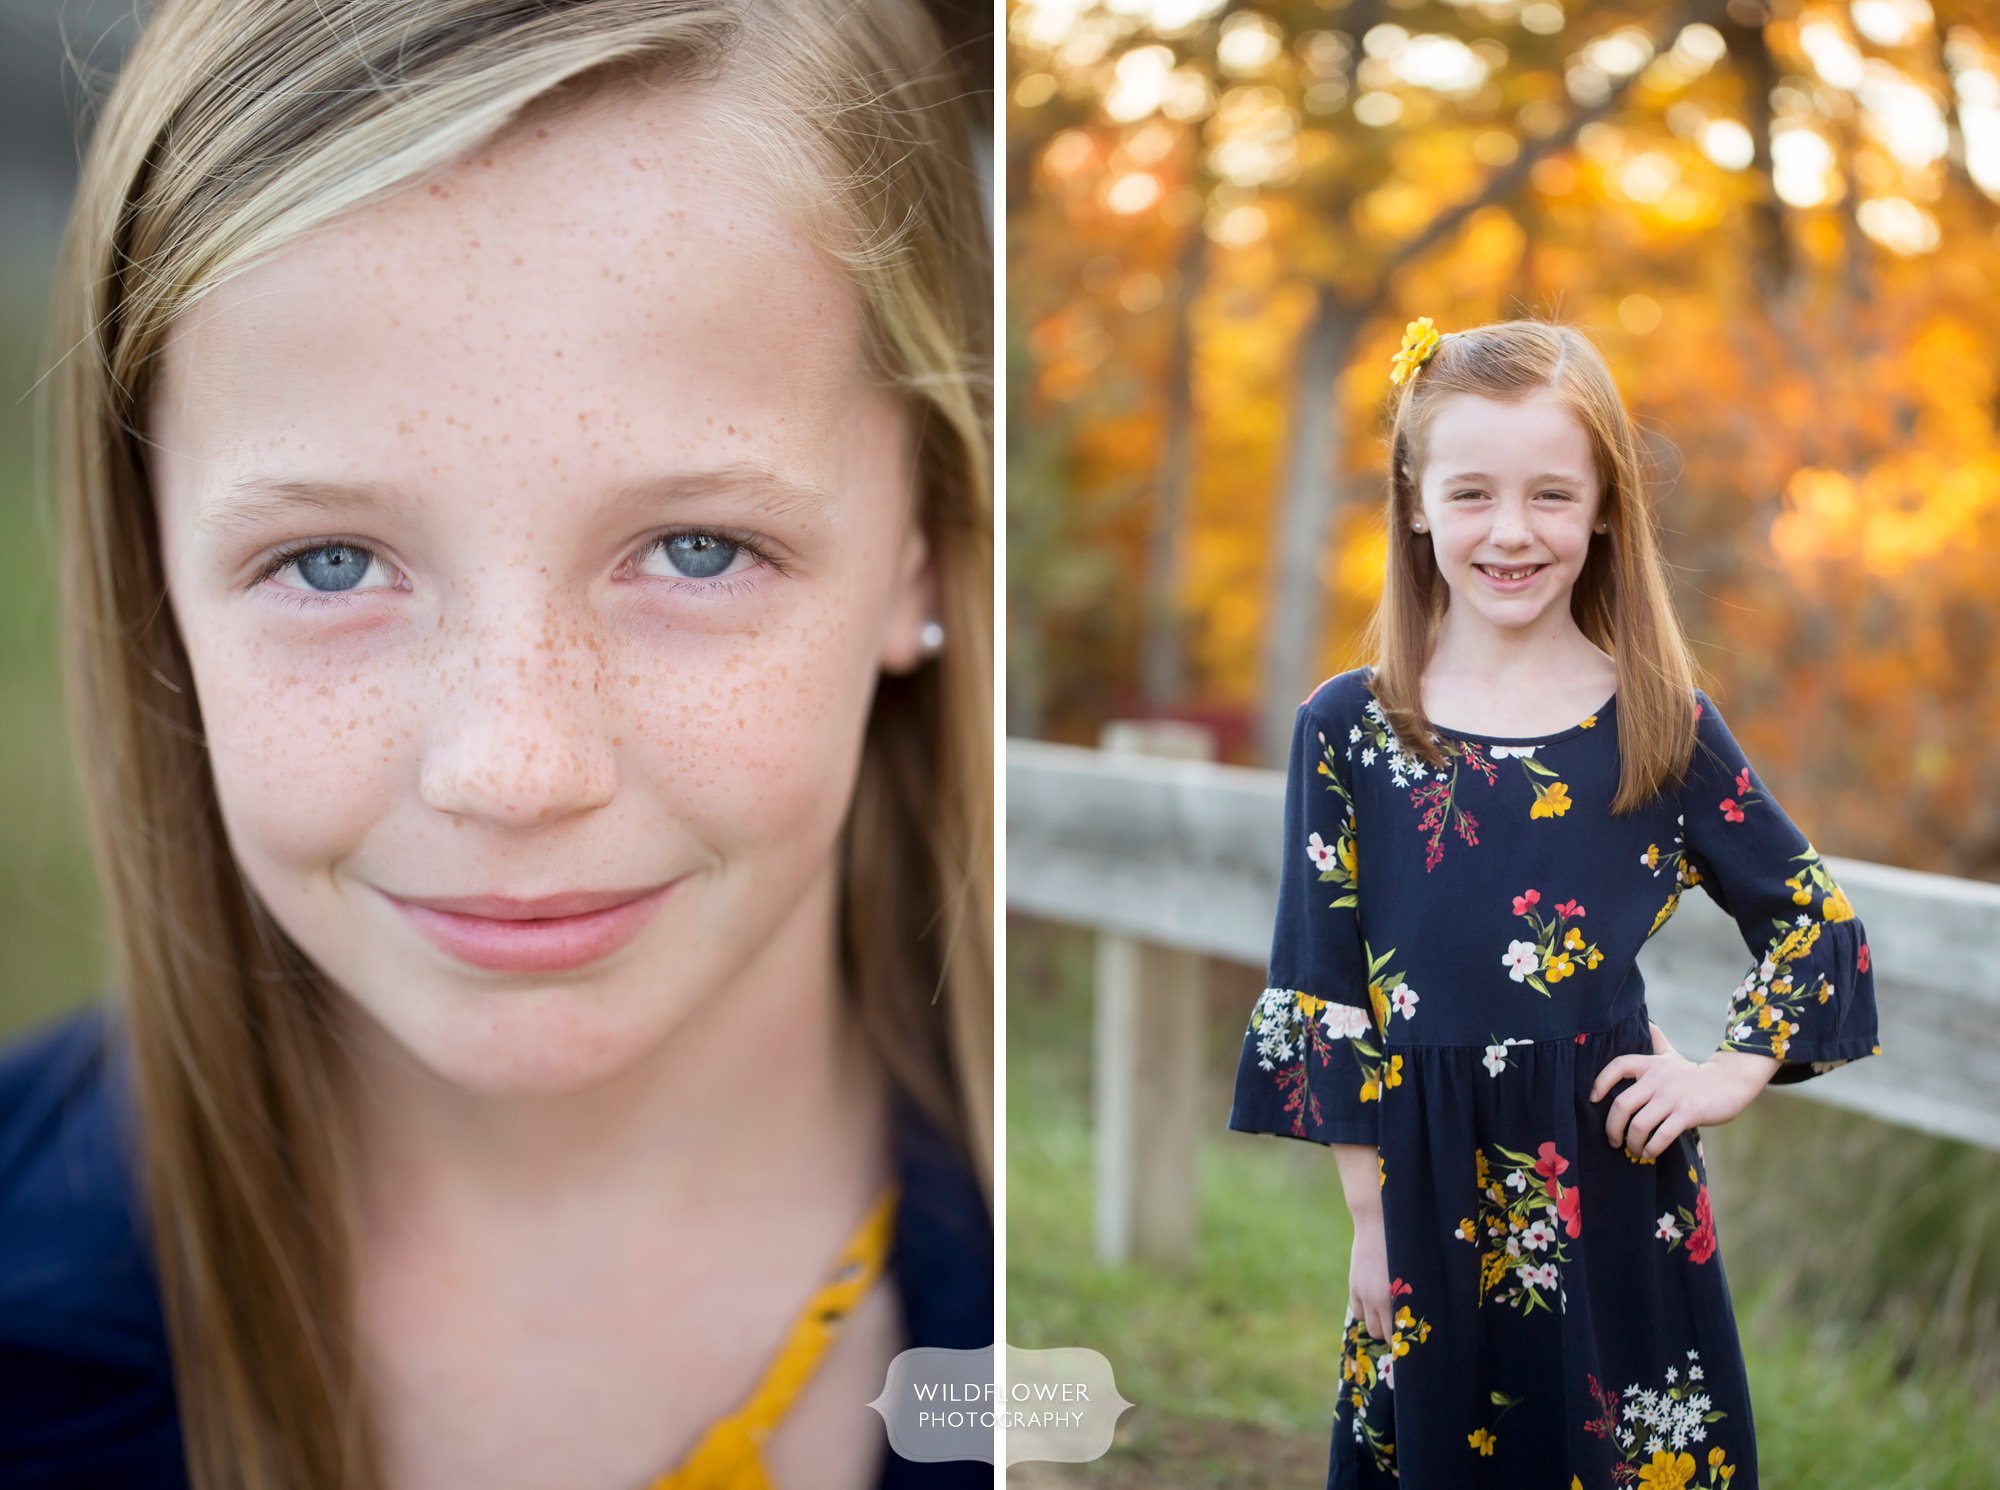 Natural children portraits with freckles in Columbia, MO.